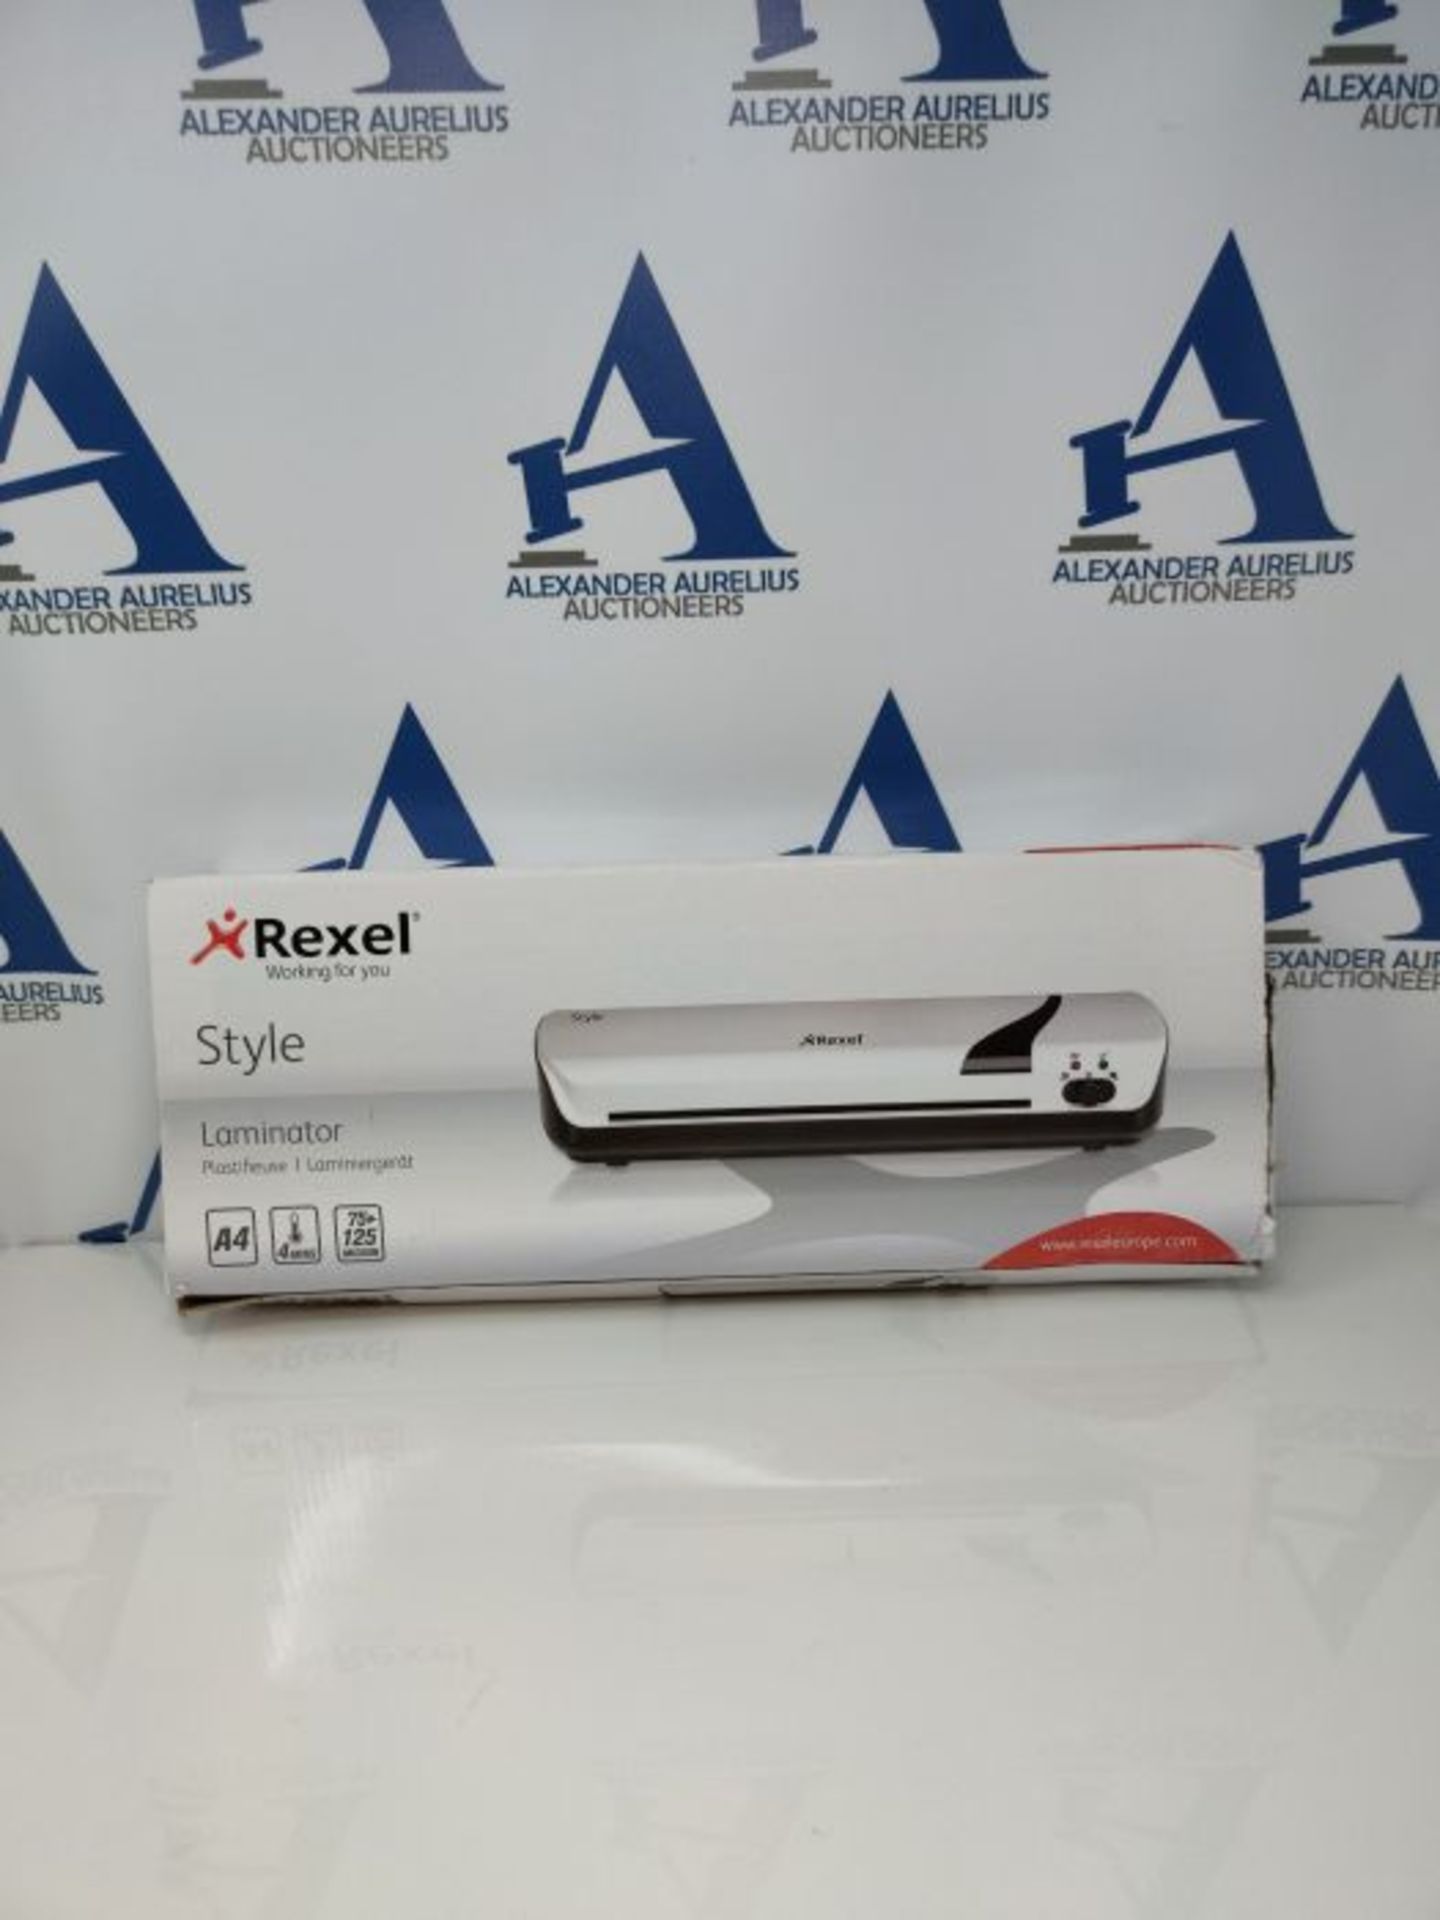 Rexel Style A4 home and office laminator, White, 2104511 - Image 2 of 3